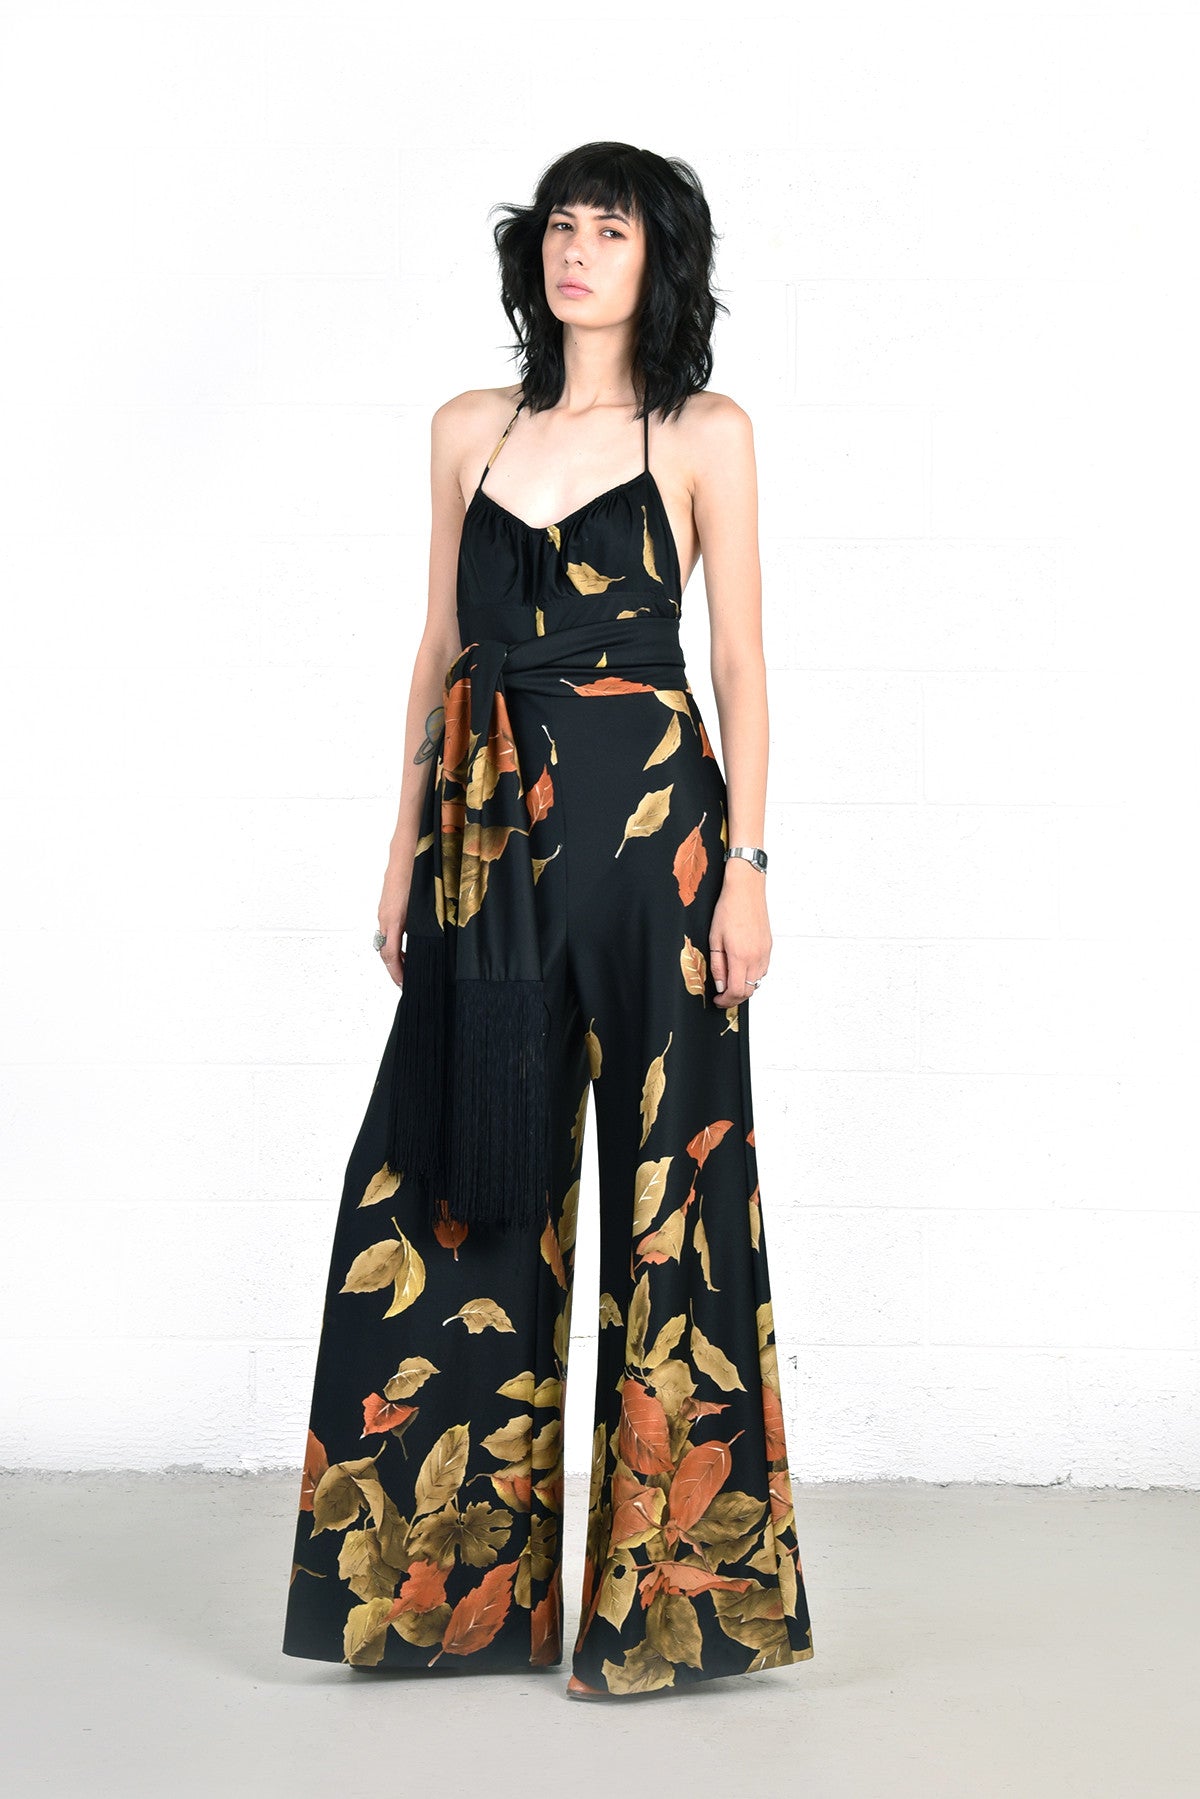 Gusty Falling Leaves Jumpsuit & Scarf